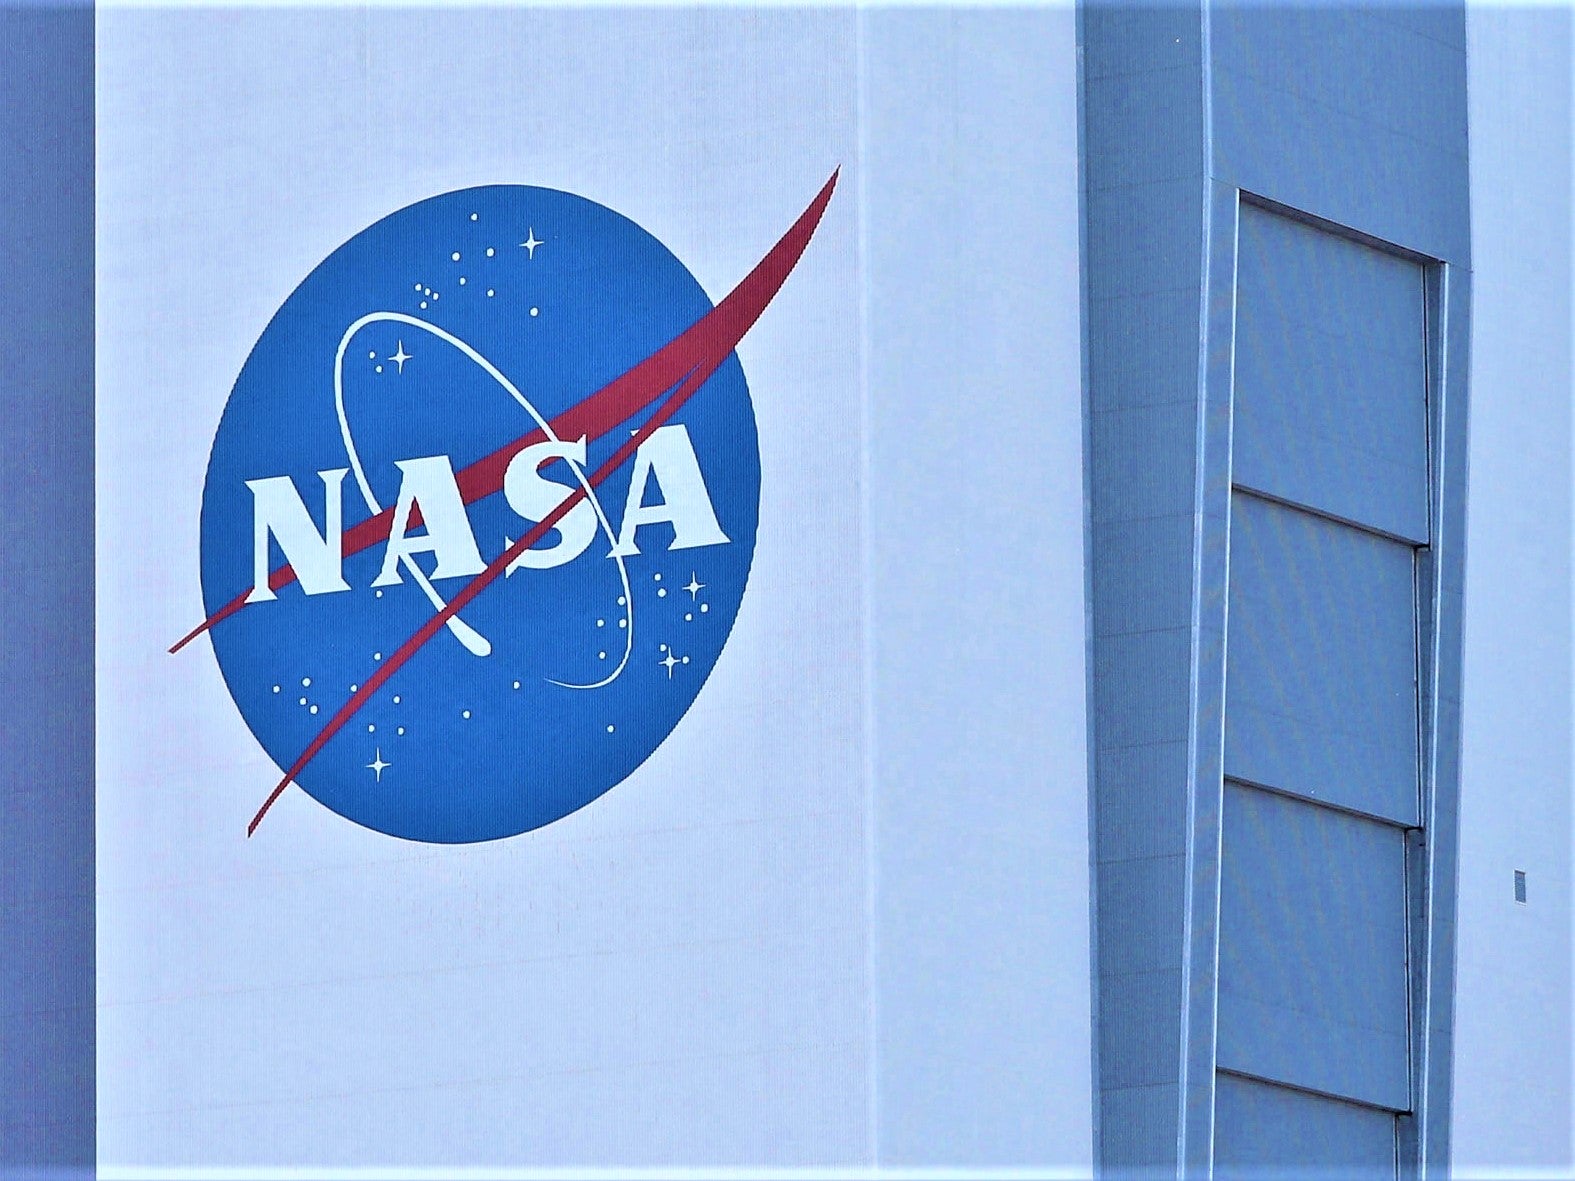 Nasa’s logo on display at the Kennedy Space Center in Florida 17 March, 2022